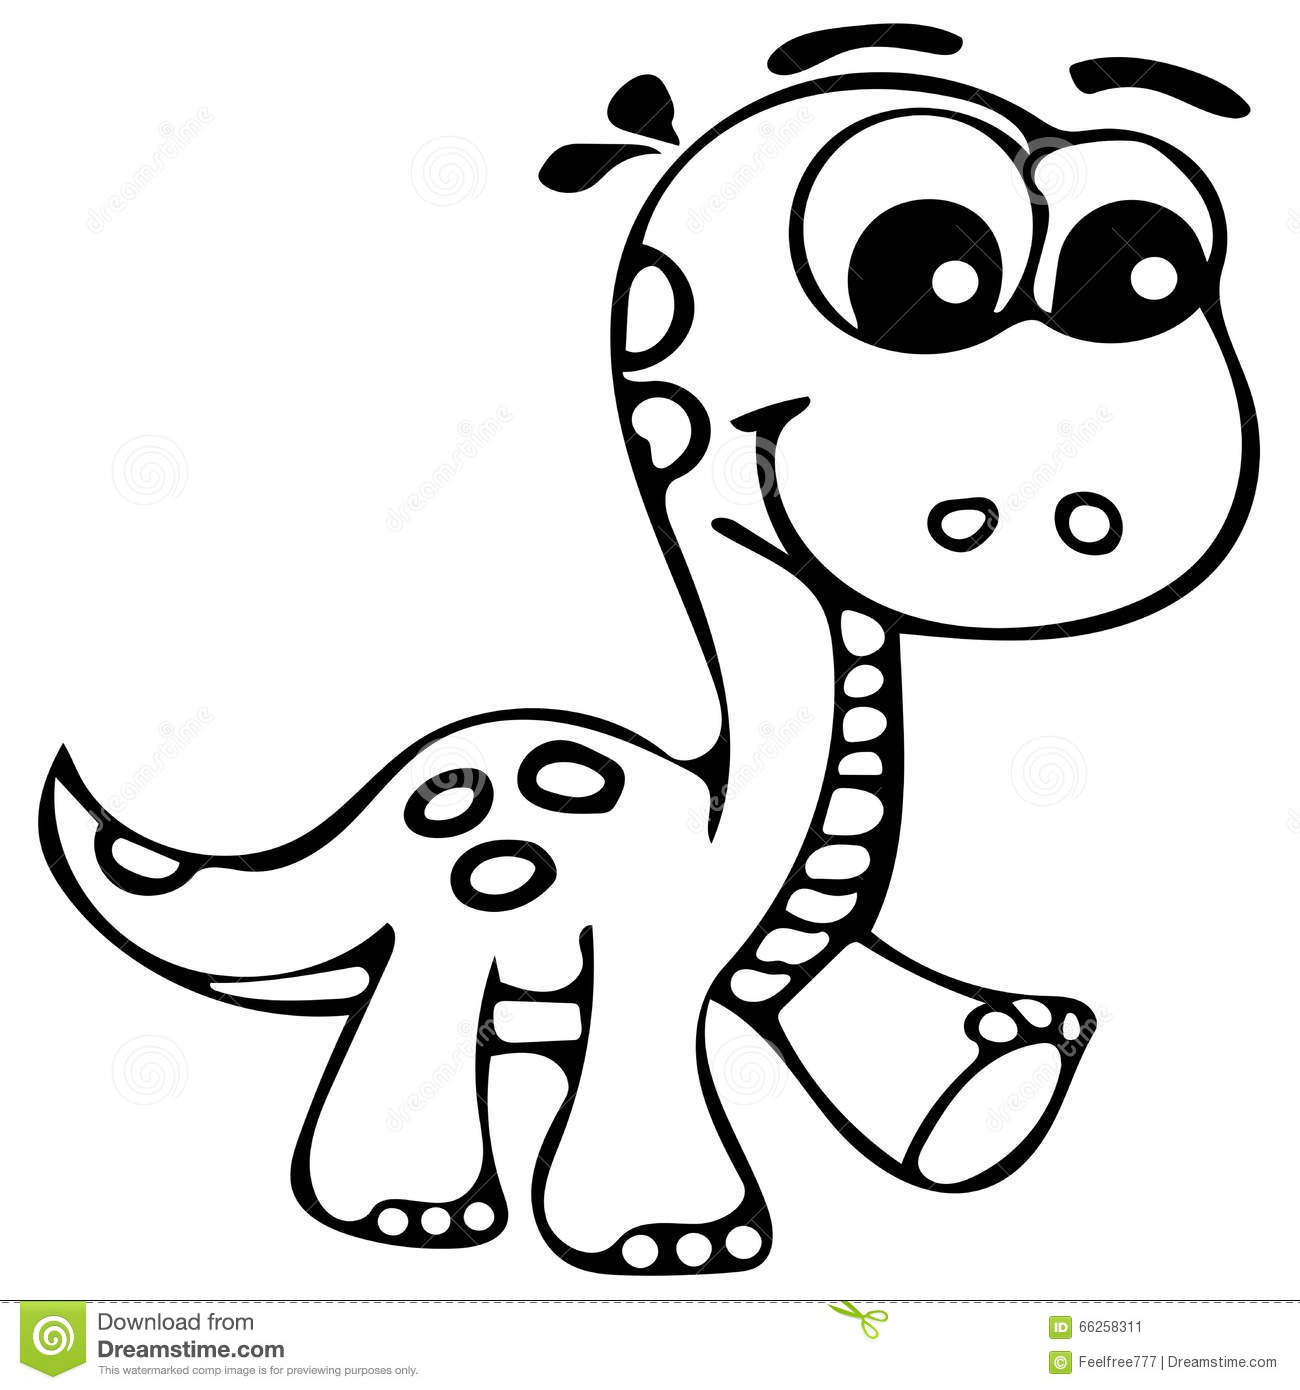 Raptor Dinosaur Coloring Pages at GetColorings.com   Free ...